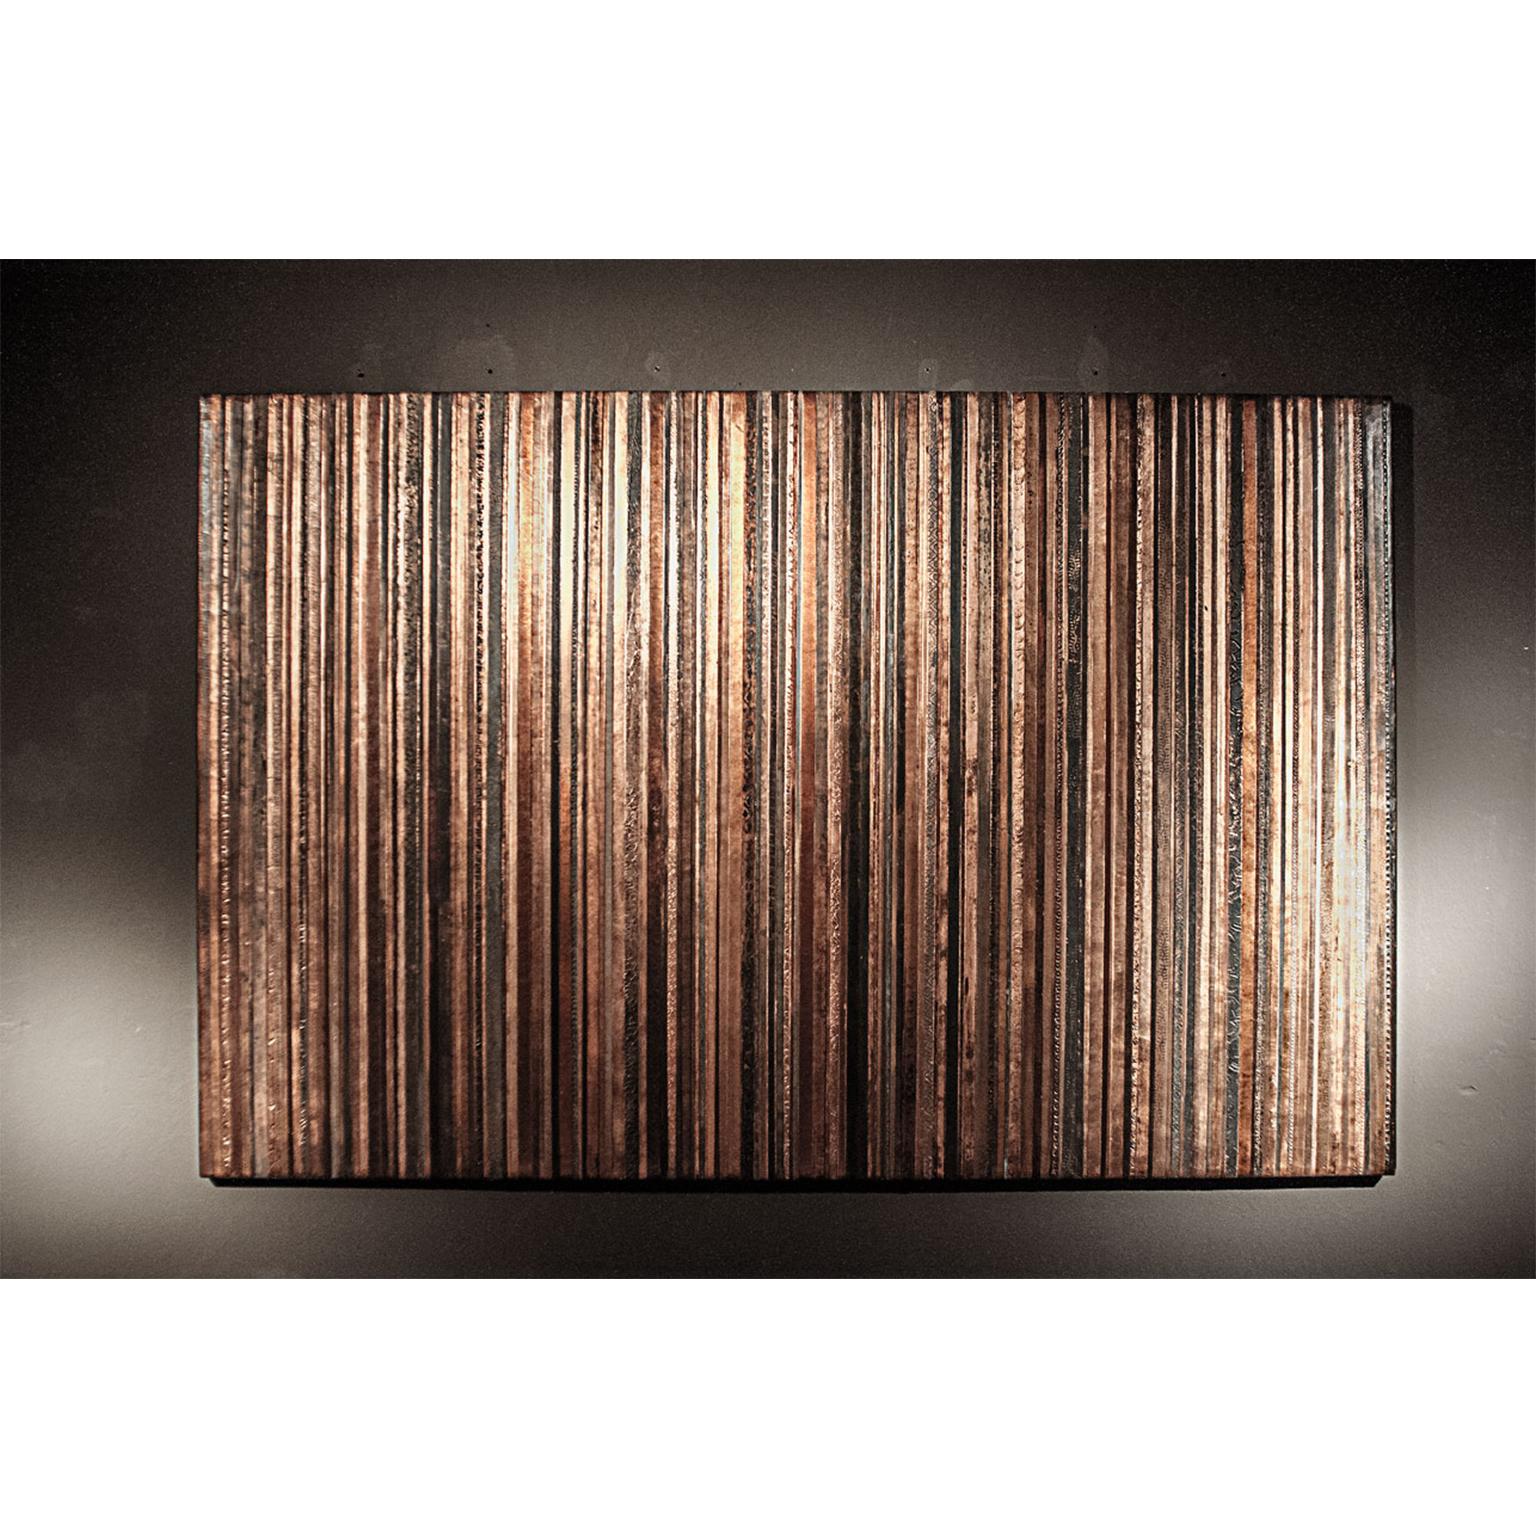 Striped artwork on canvas (230 x 150cms). Overlaid with stucco in bas relief. Painted and embellished with copper-leaf by the artist.